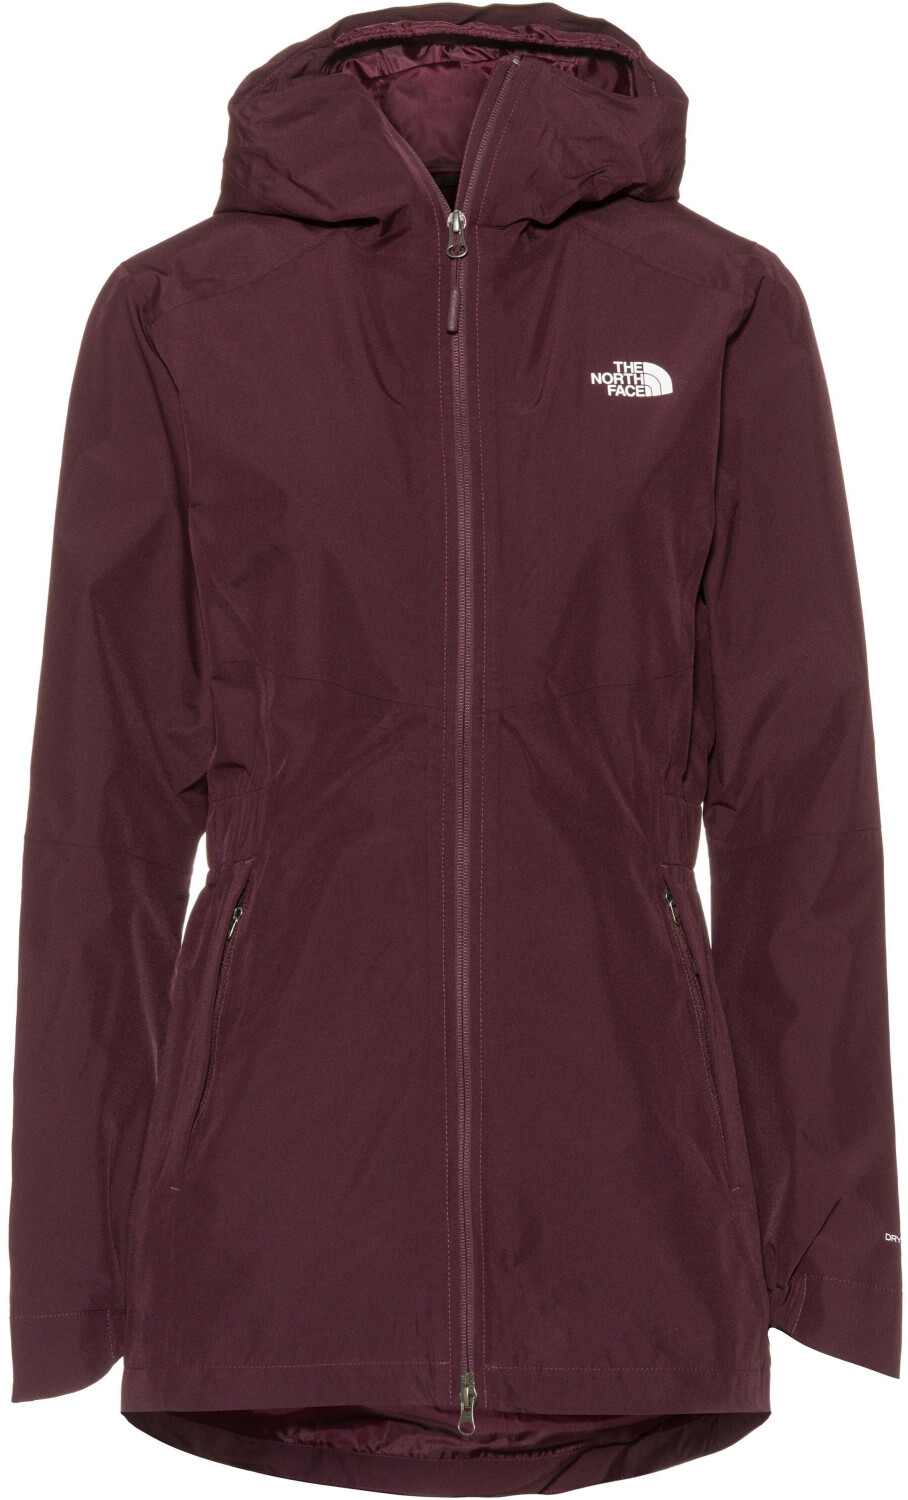 Buy The North Face Hikesteller Parka Shell Jacket Women root brown from ...